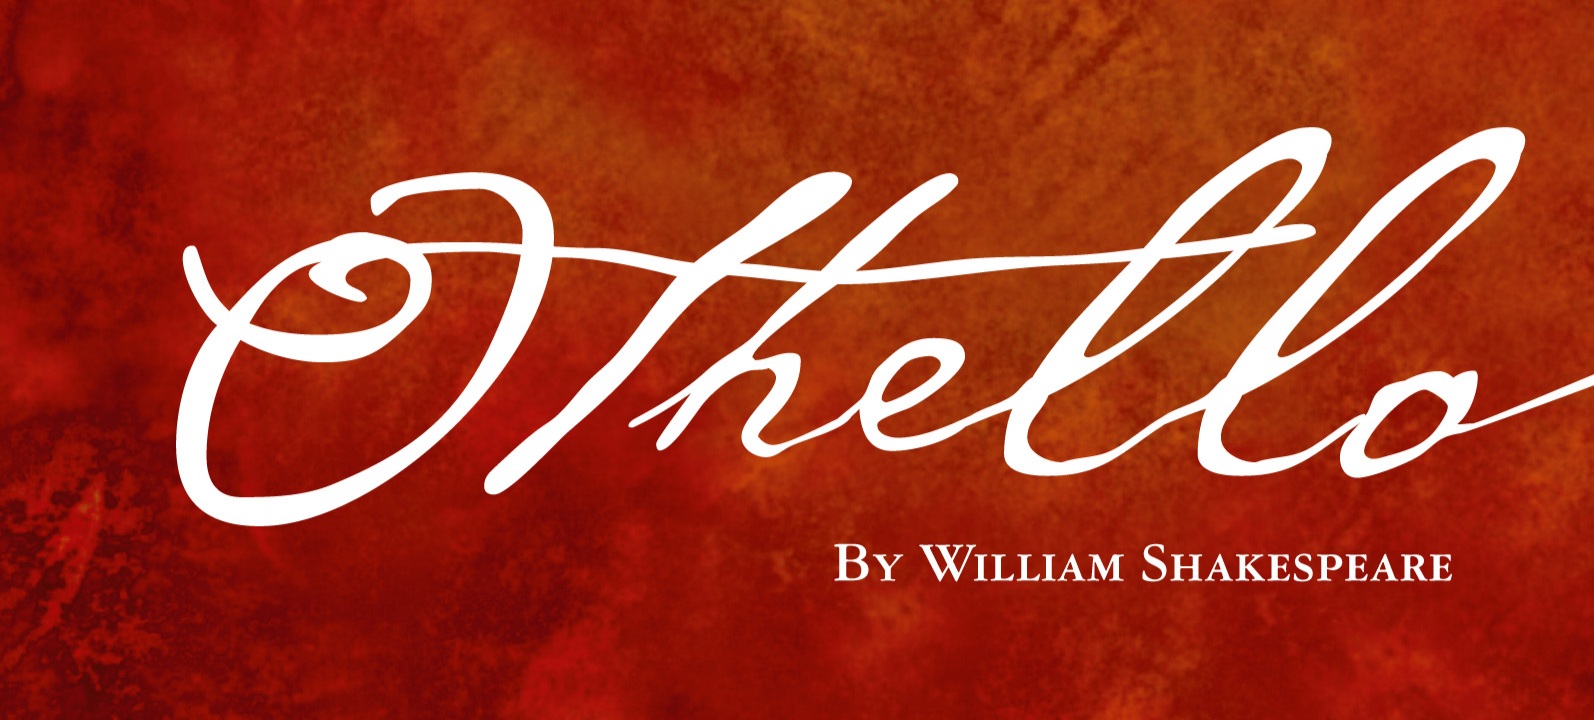 THERE'S MAGIC IN THE WEB OF IT!: A classic logo for William Shakespeare's classic tragedy of 